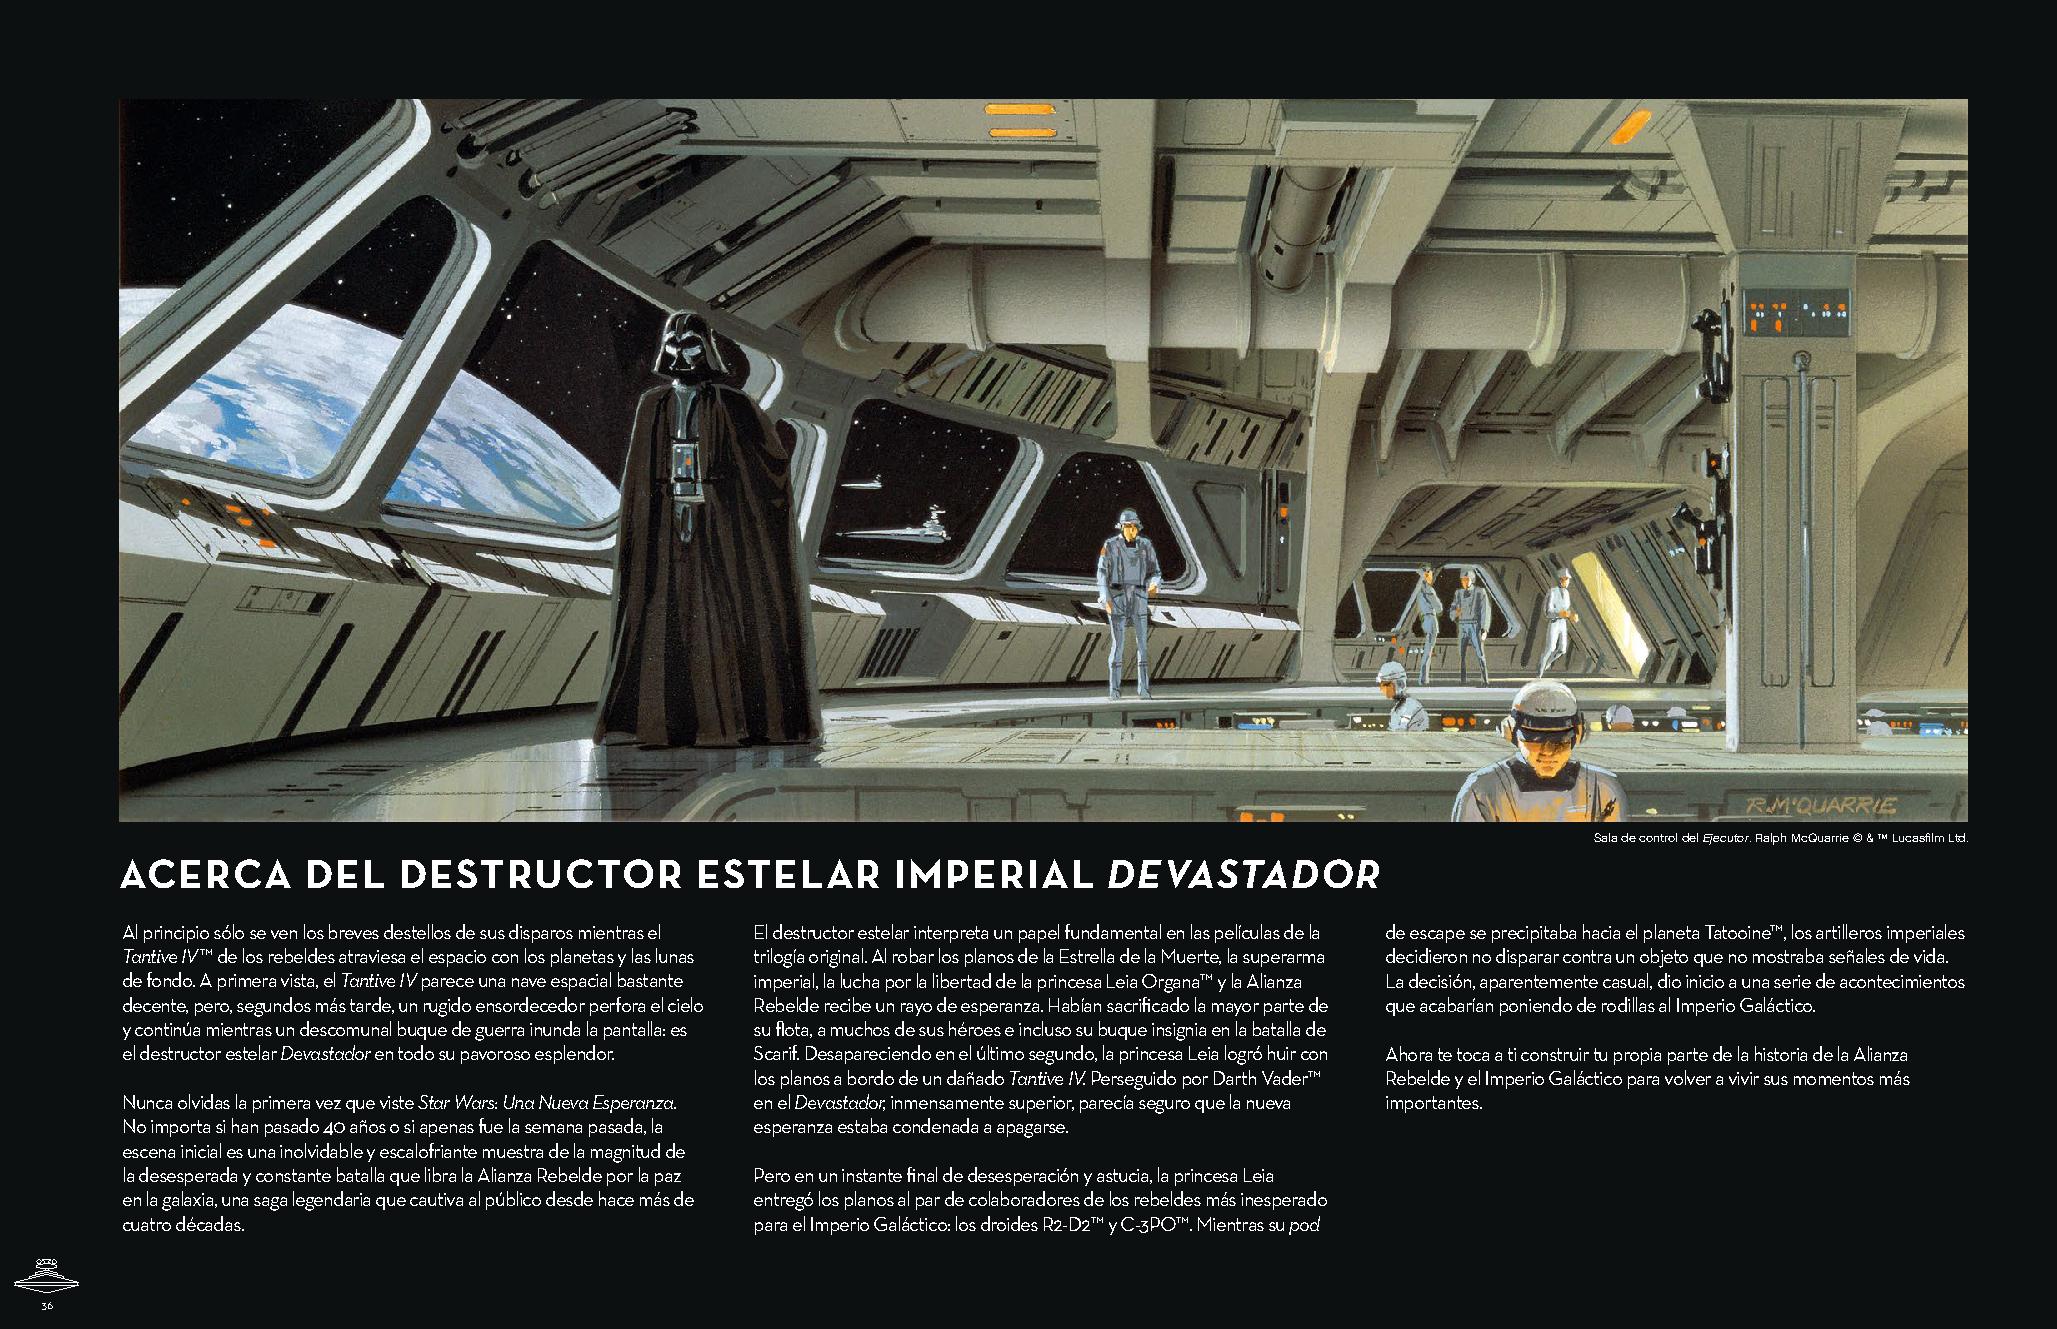 Imperial Star Destroyer 75252 レゴの商品情報 レゴの説明書・組立方法 36 page